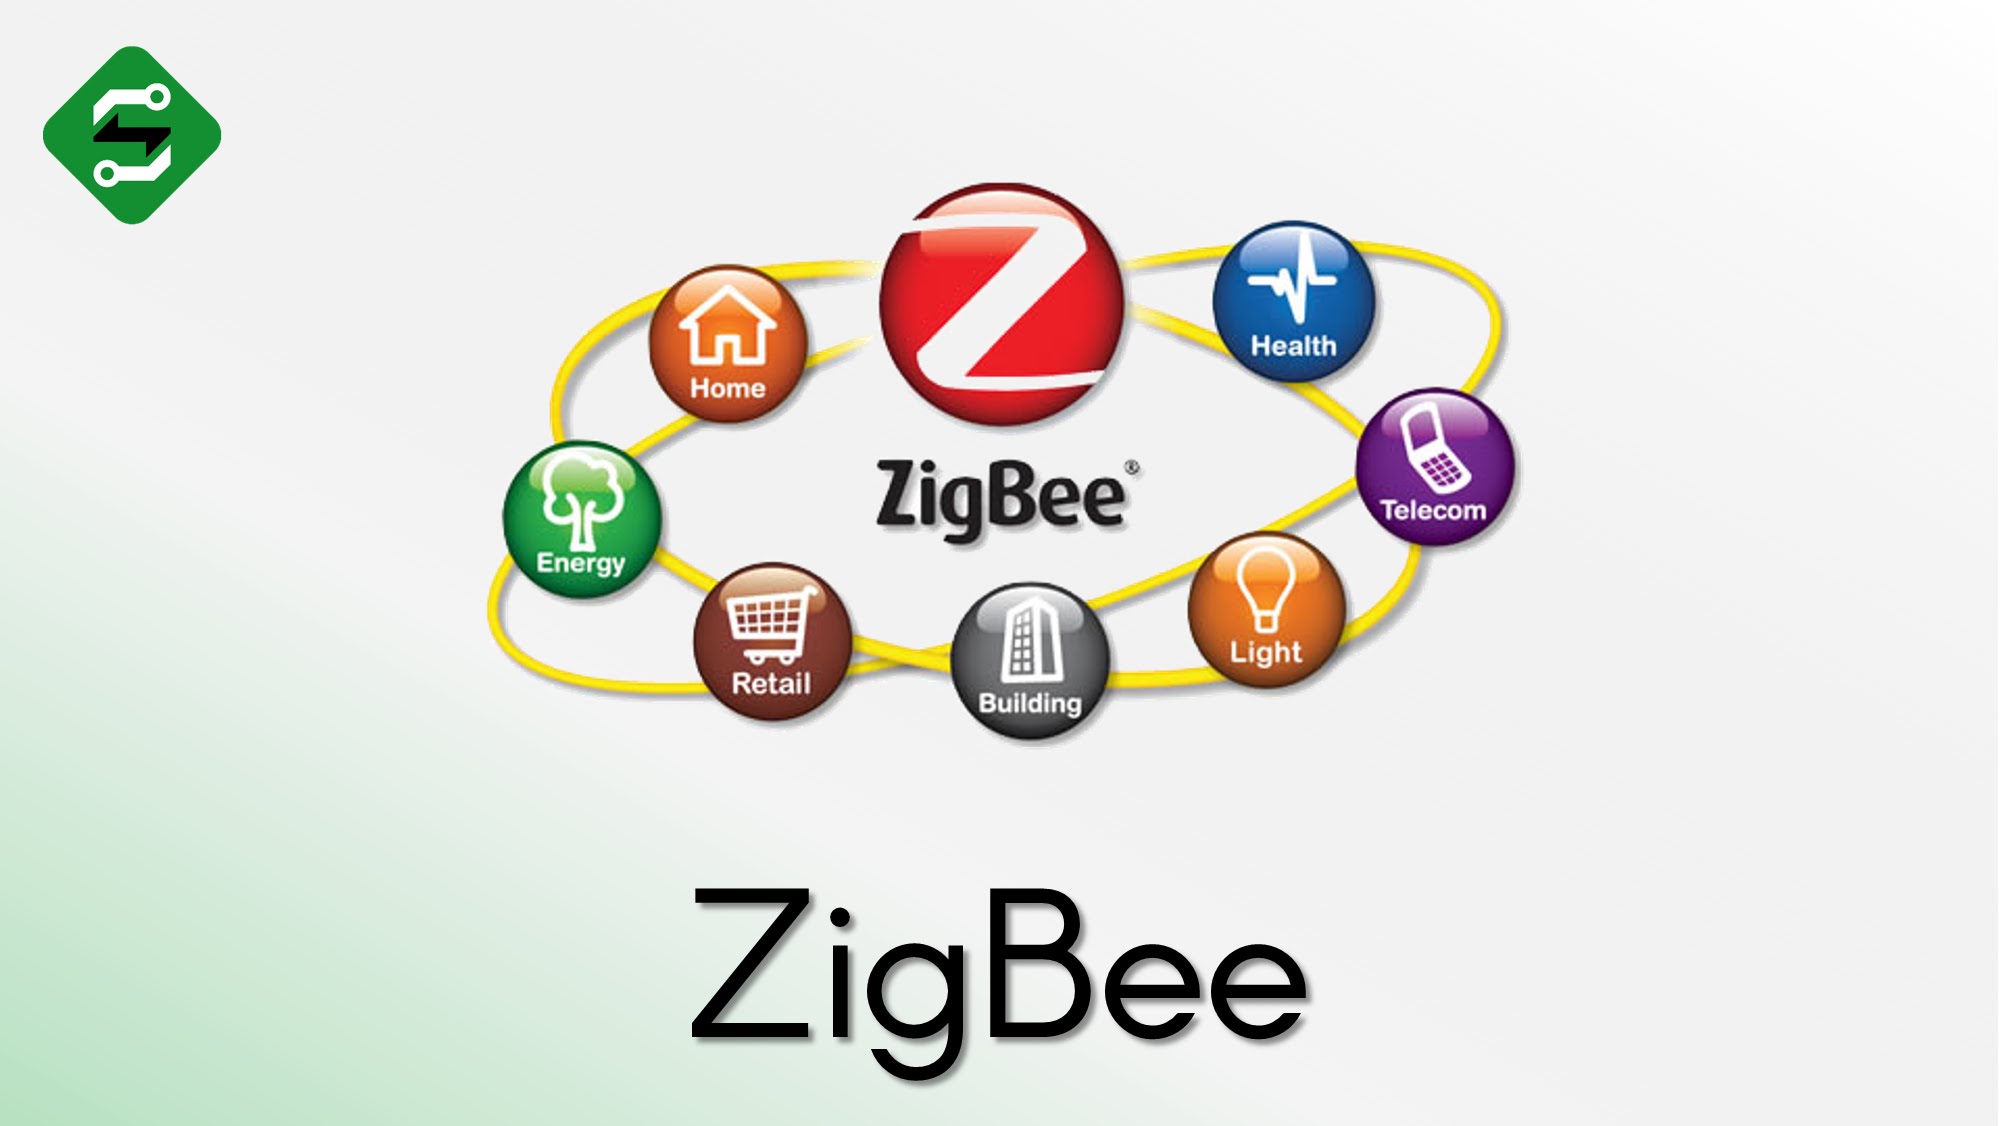 ZigBee-Reseau-Maille-SILIS-Electronique